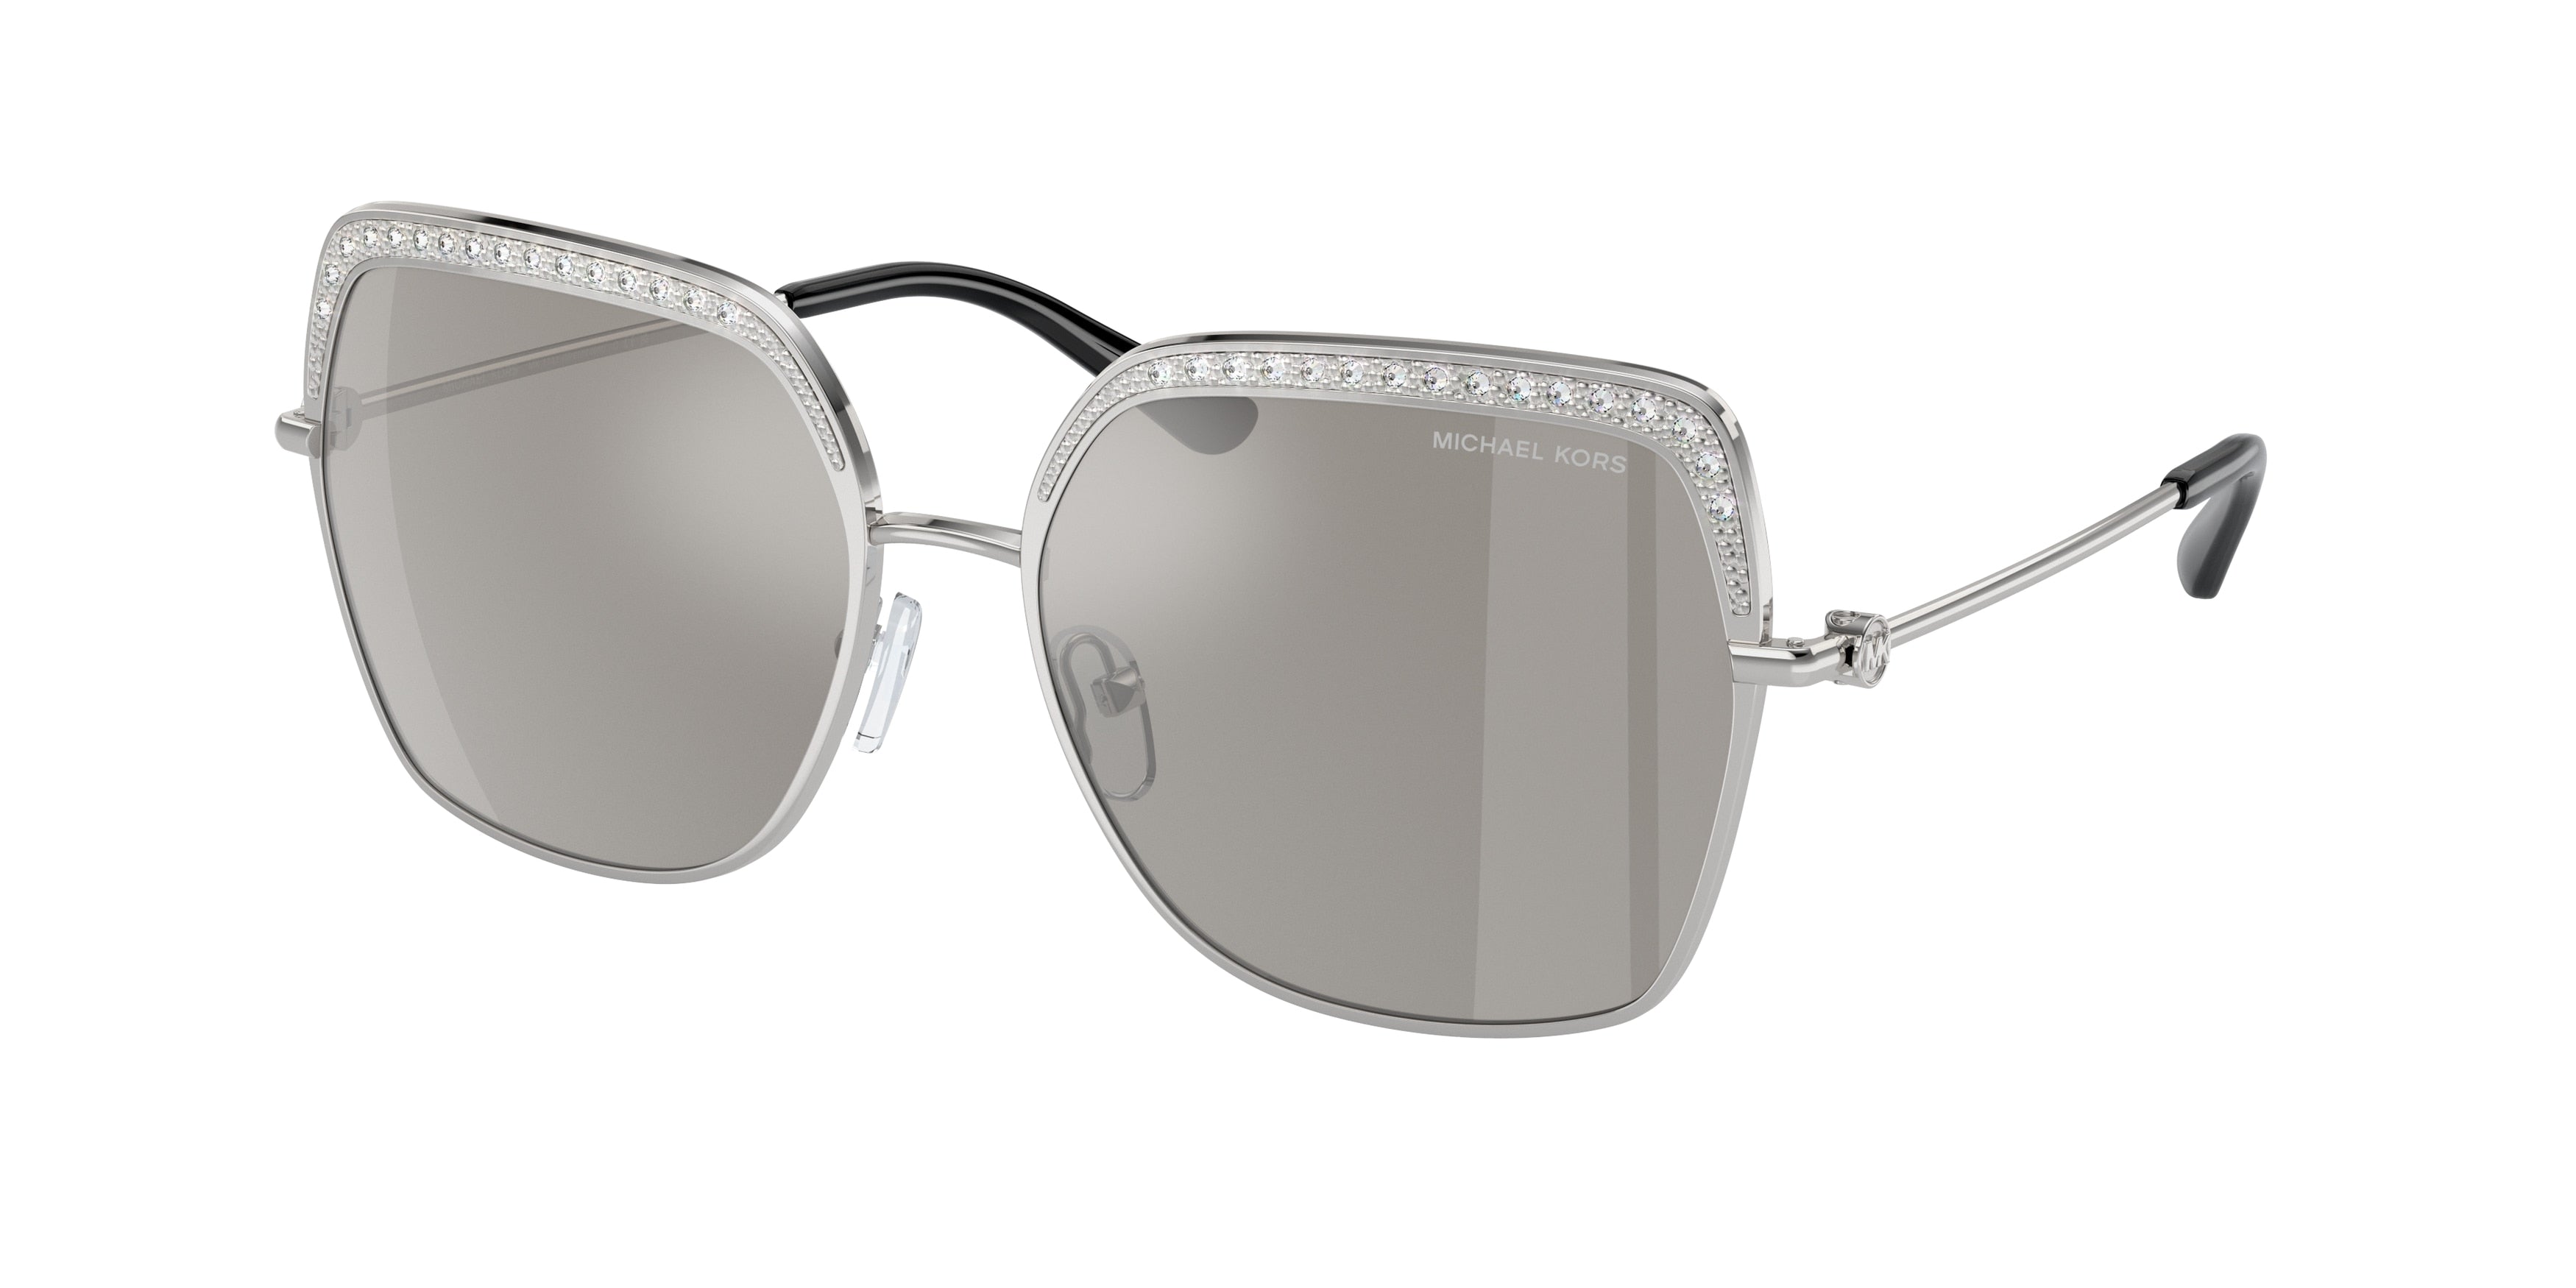 Michael Kors GREENPOINT MK1141 Square Sunglasses  18936G-Silver 57-140-16 - Color Map Silver